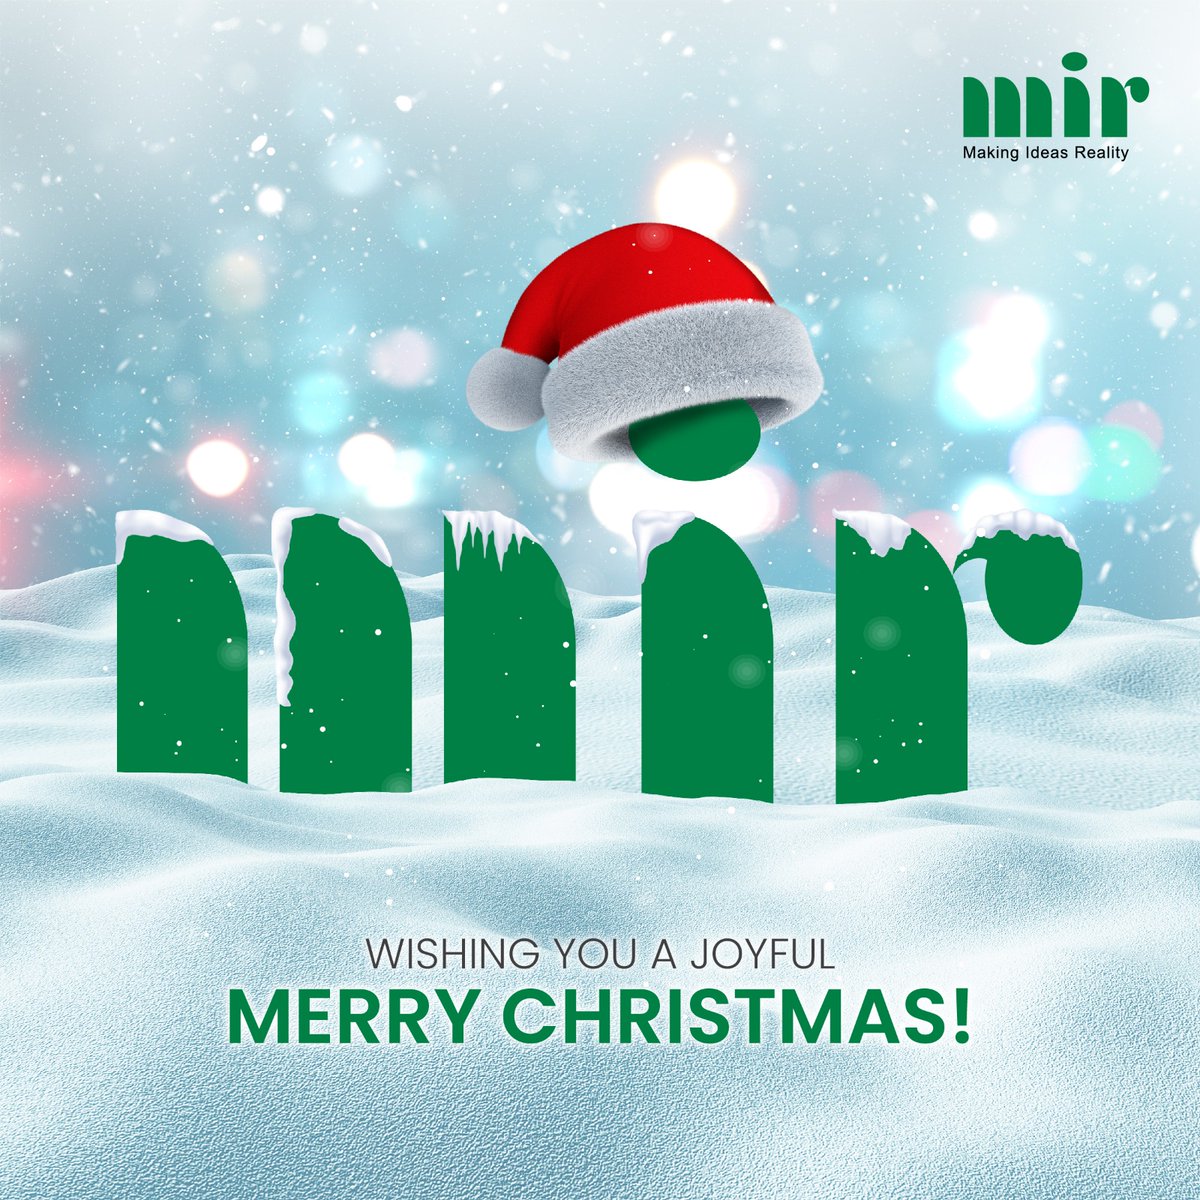 May the spirit of the season bring you happiness with new opportunities and joy.

Merry Christmas!

#mirgroup #MakingIdeasReality
#শুভবড়দিন #Christmas #santa
#merrychristmas